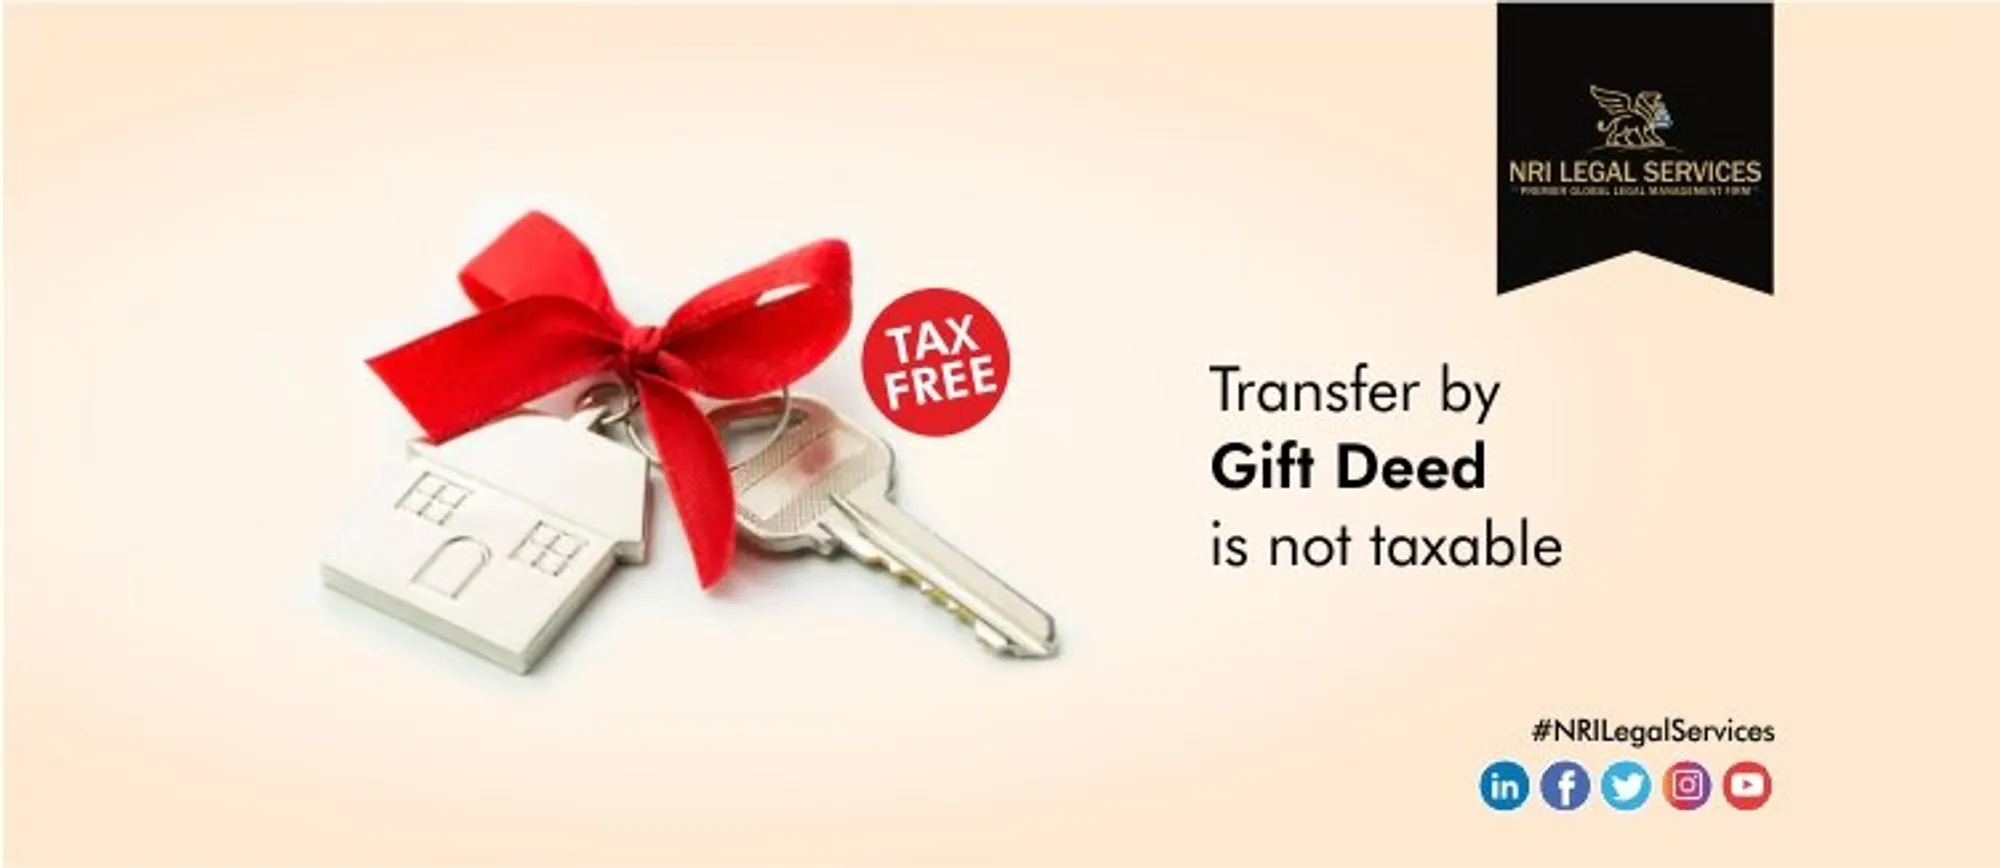 Transfer by Gift deed is not taxable